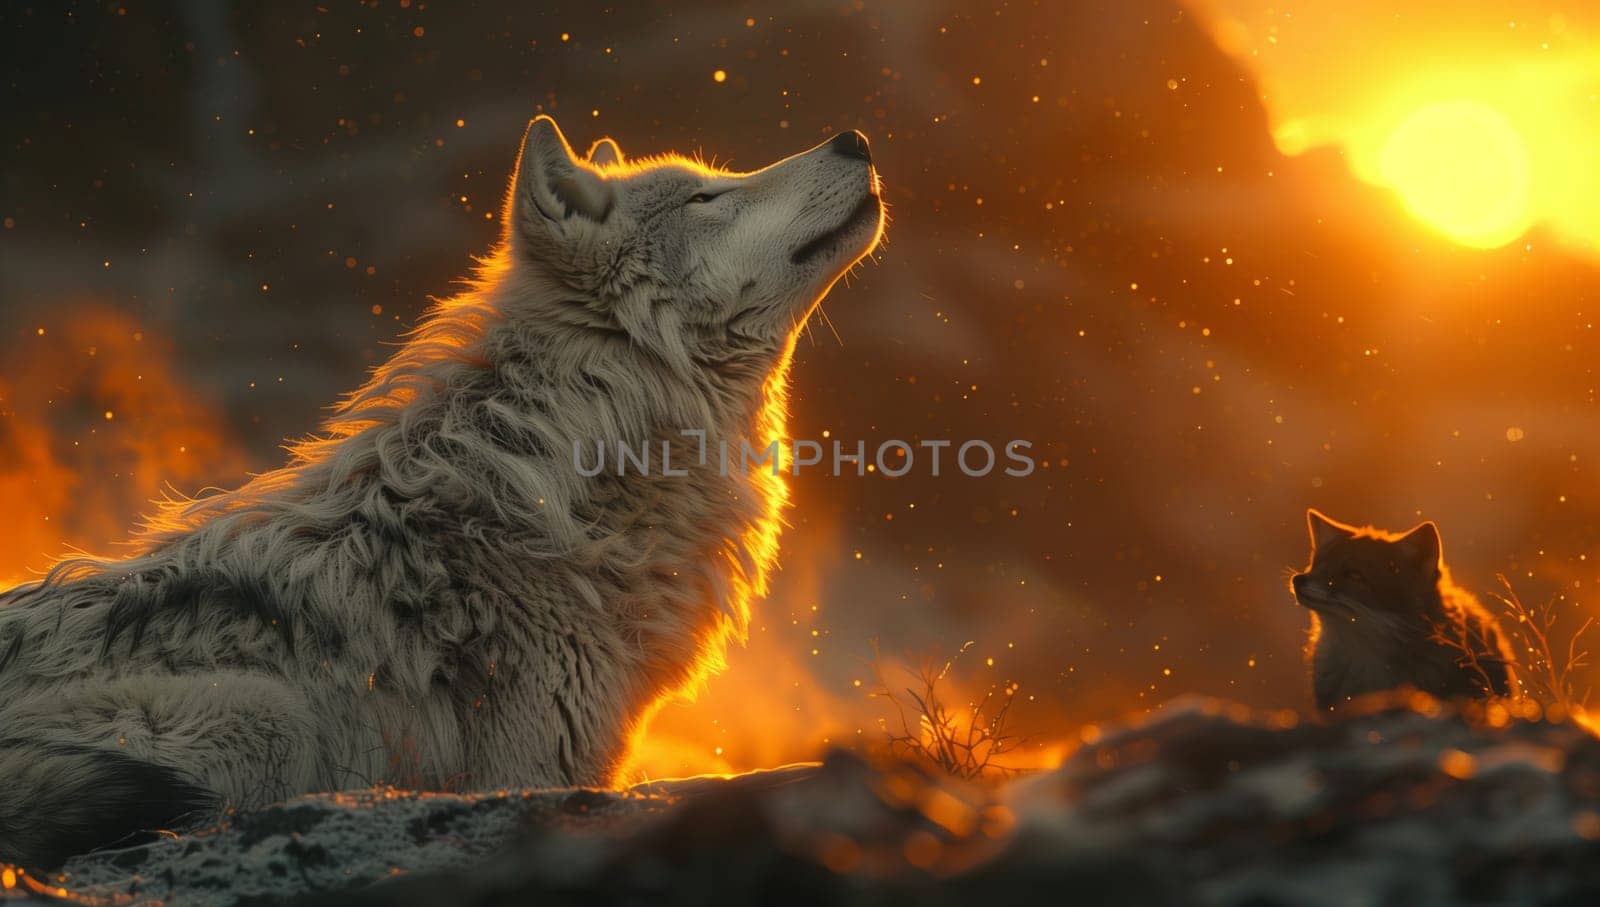 A carnivore wolf and a Felidae cub with whiskers and fangs stand together next to a fire, enjoying the heat in the terrestrial landscape